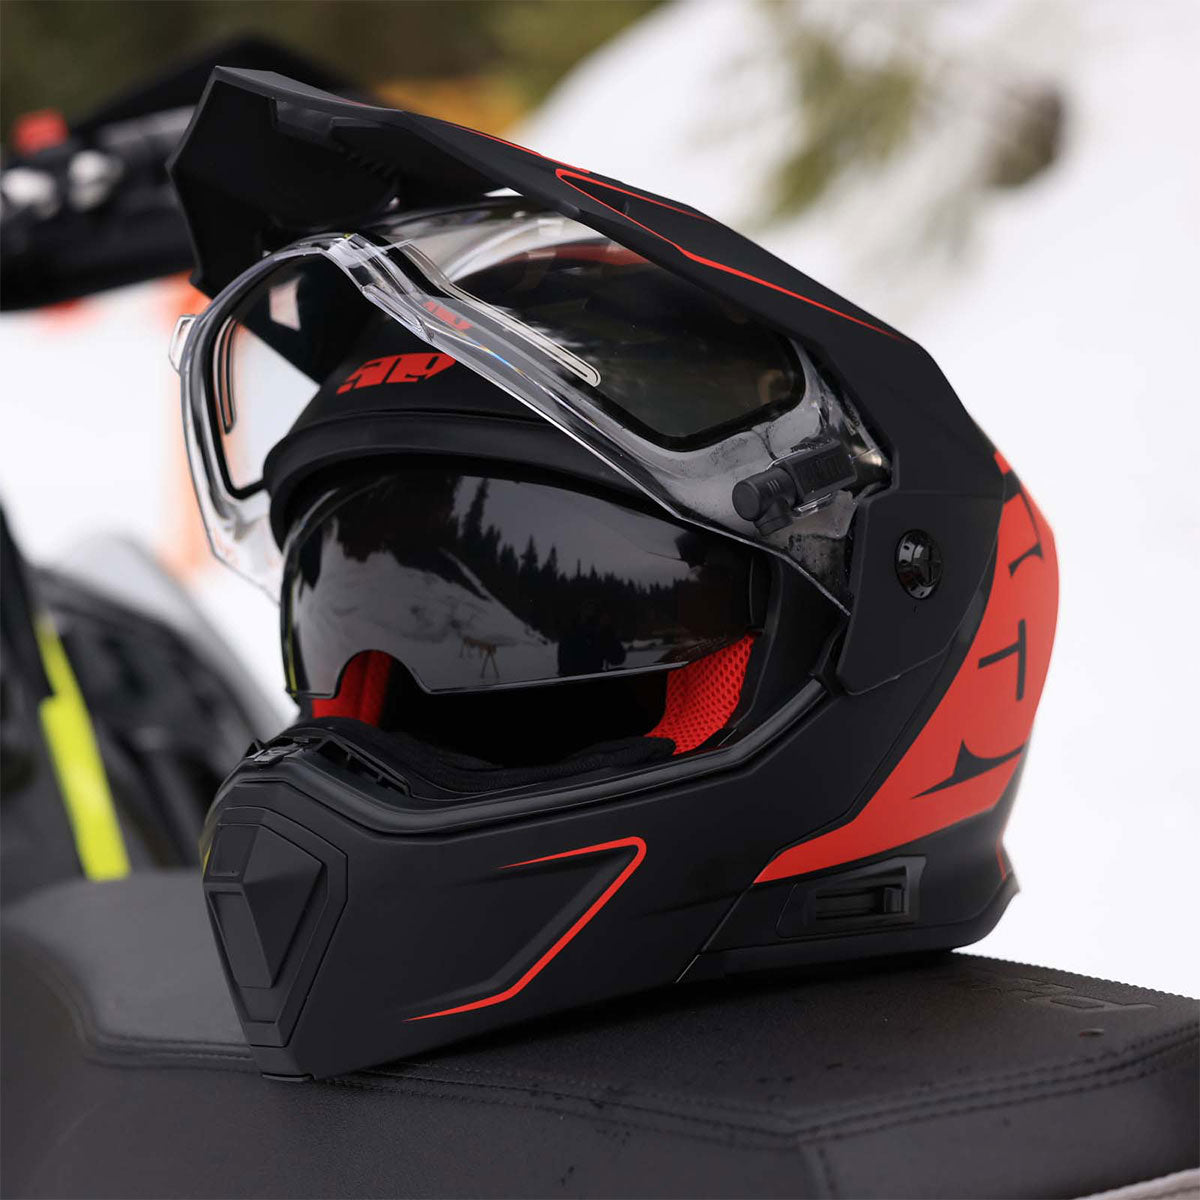 Does 509 Offer Replacement Parts for Helmets?